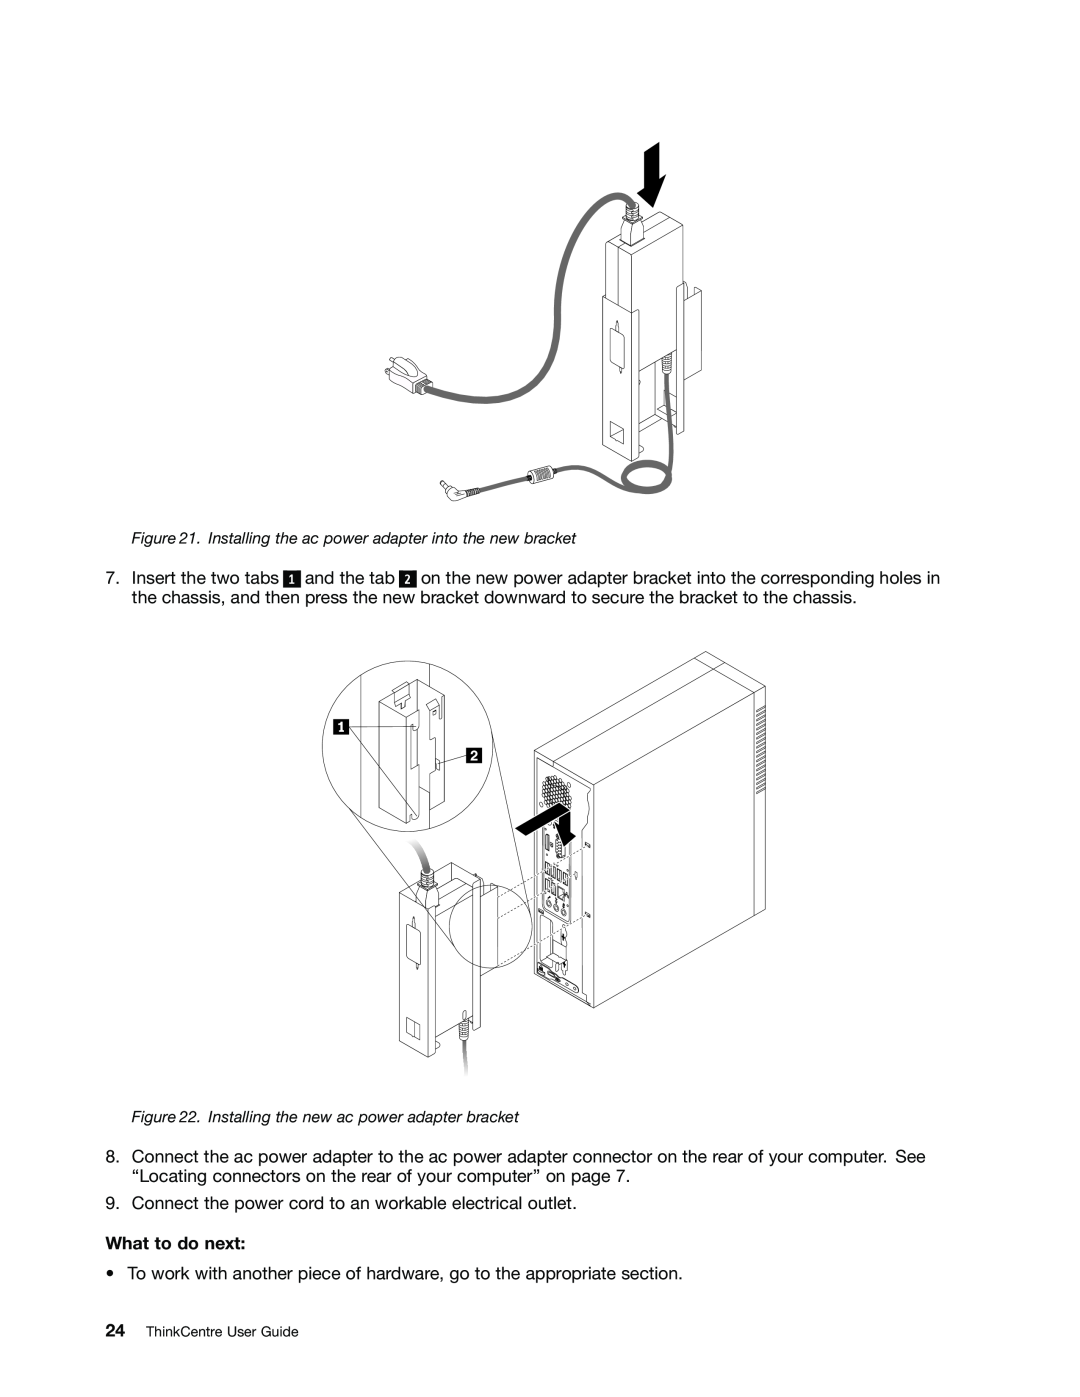 Lenovo 5092, 3034, 6667, 5226 What to do next, Installing the ac power adapter into the new bracket, ThinkCentre User Guide 